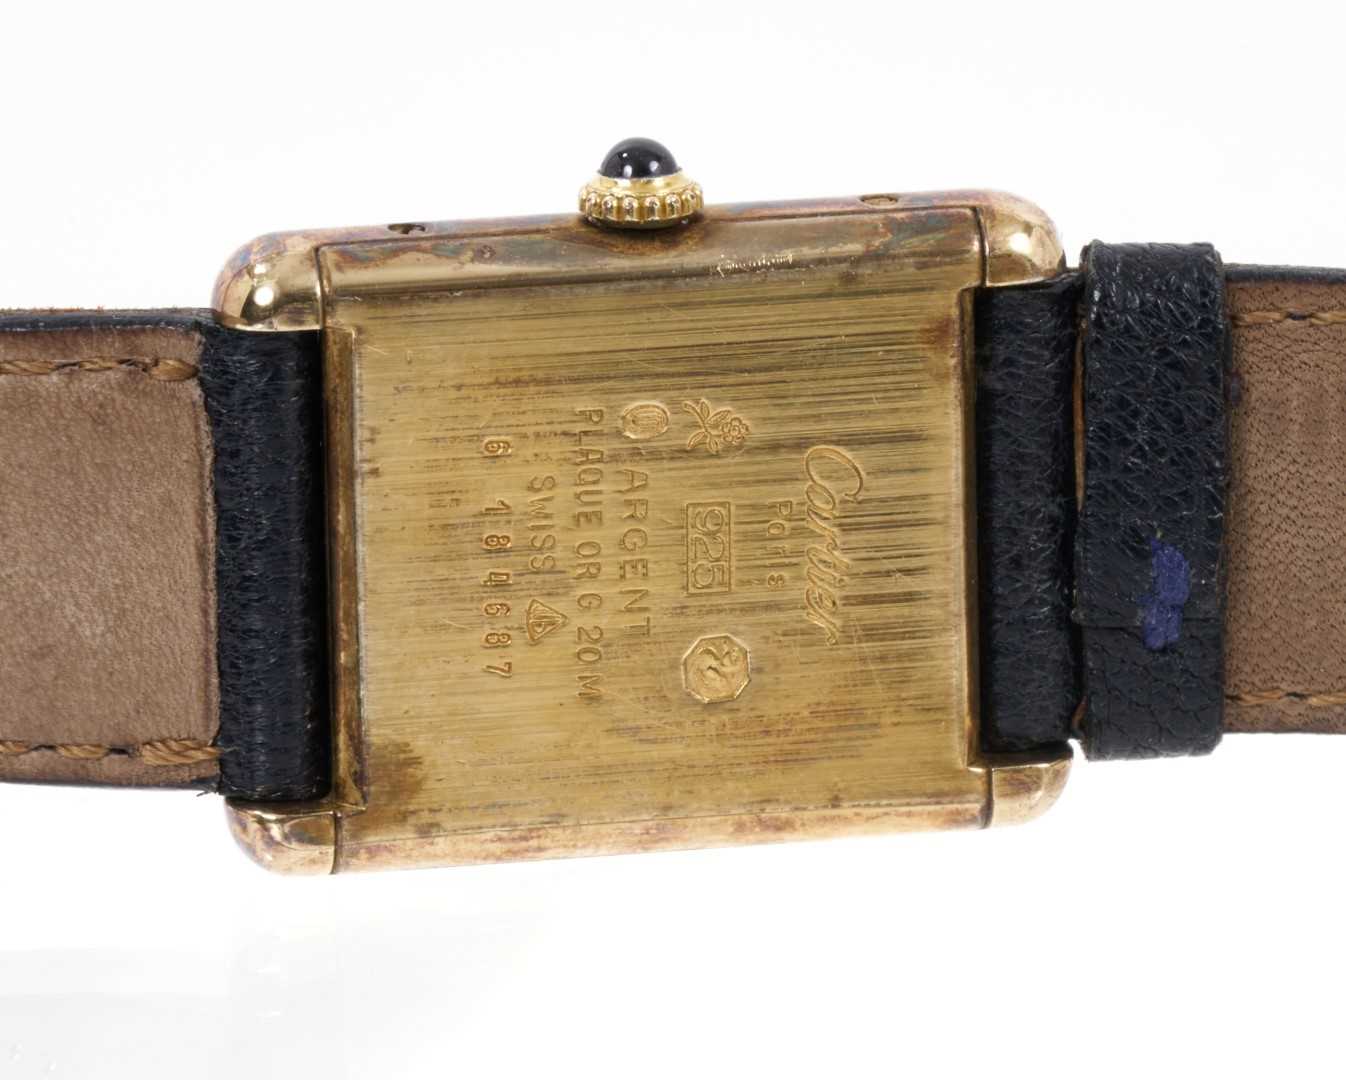 Cartier silver gilt Tank wristwatch with manual wind movement - Image 5 of 5